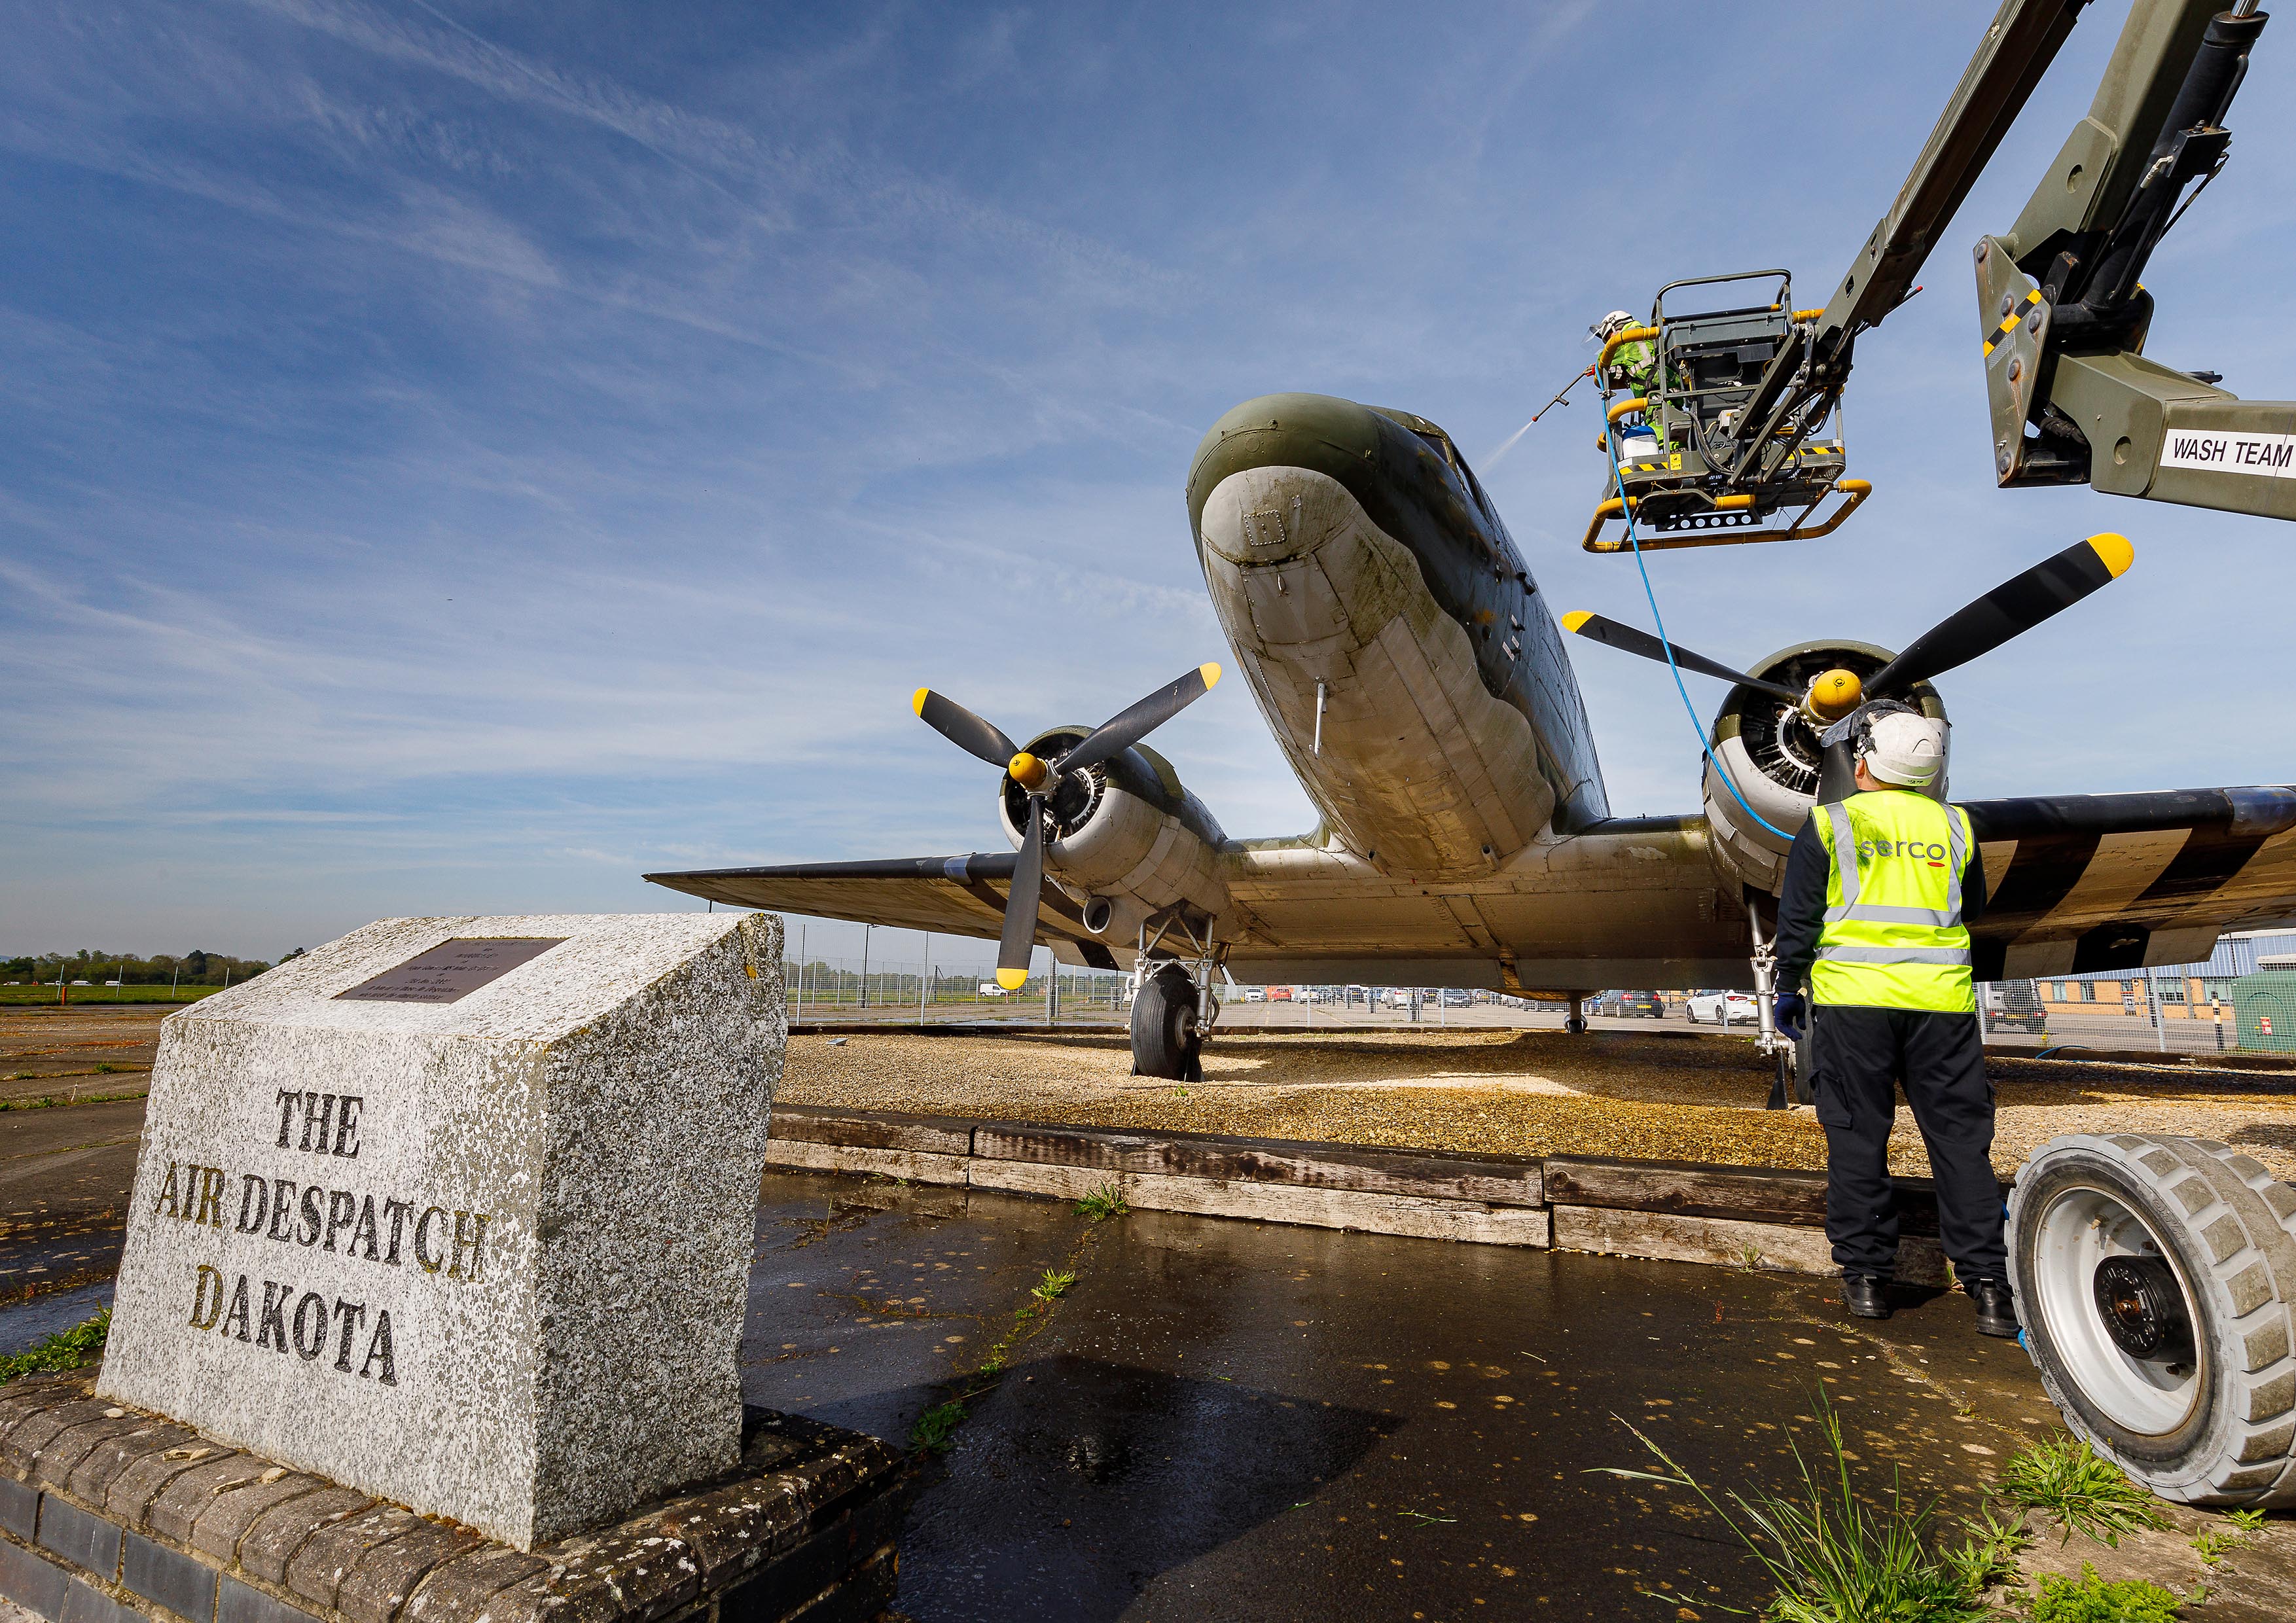 Photo: The Dakota aircraft rests behind its memorial stone and plaque as members of the Serco Aircraft Wash Team pressure wash the area outside of the flight deck